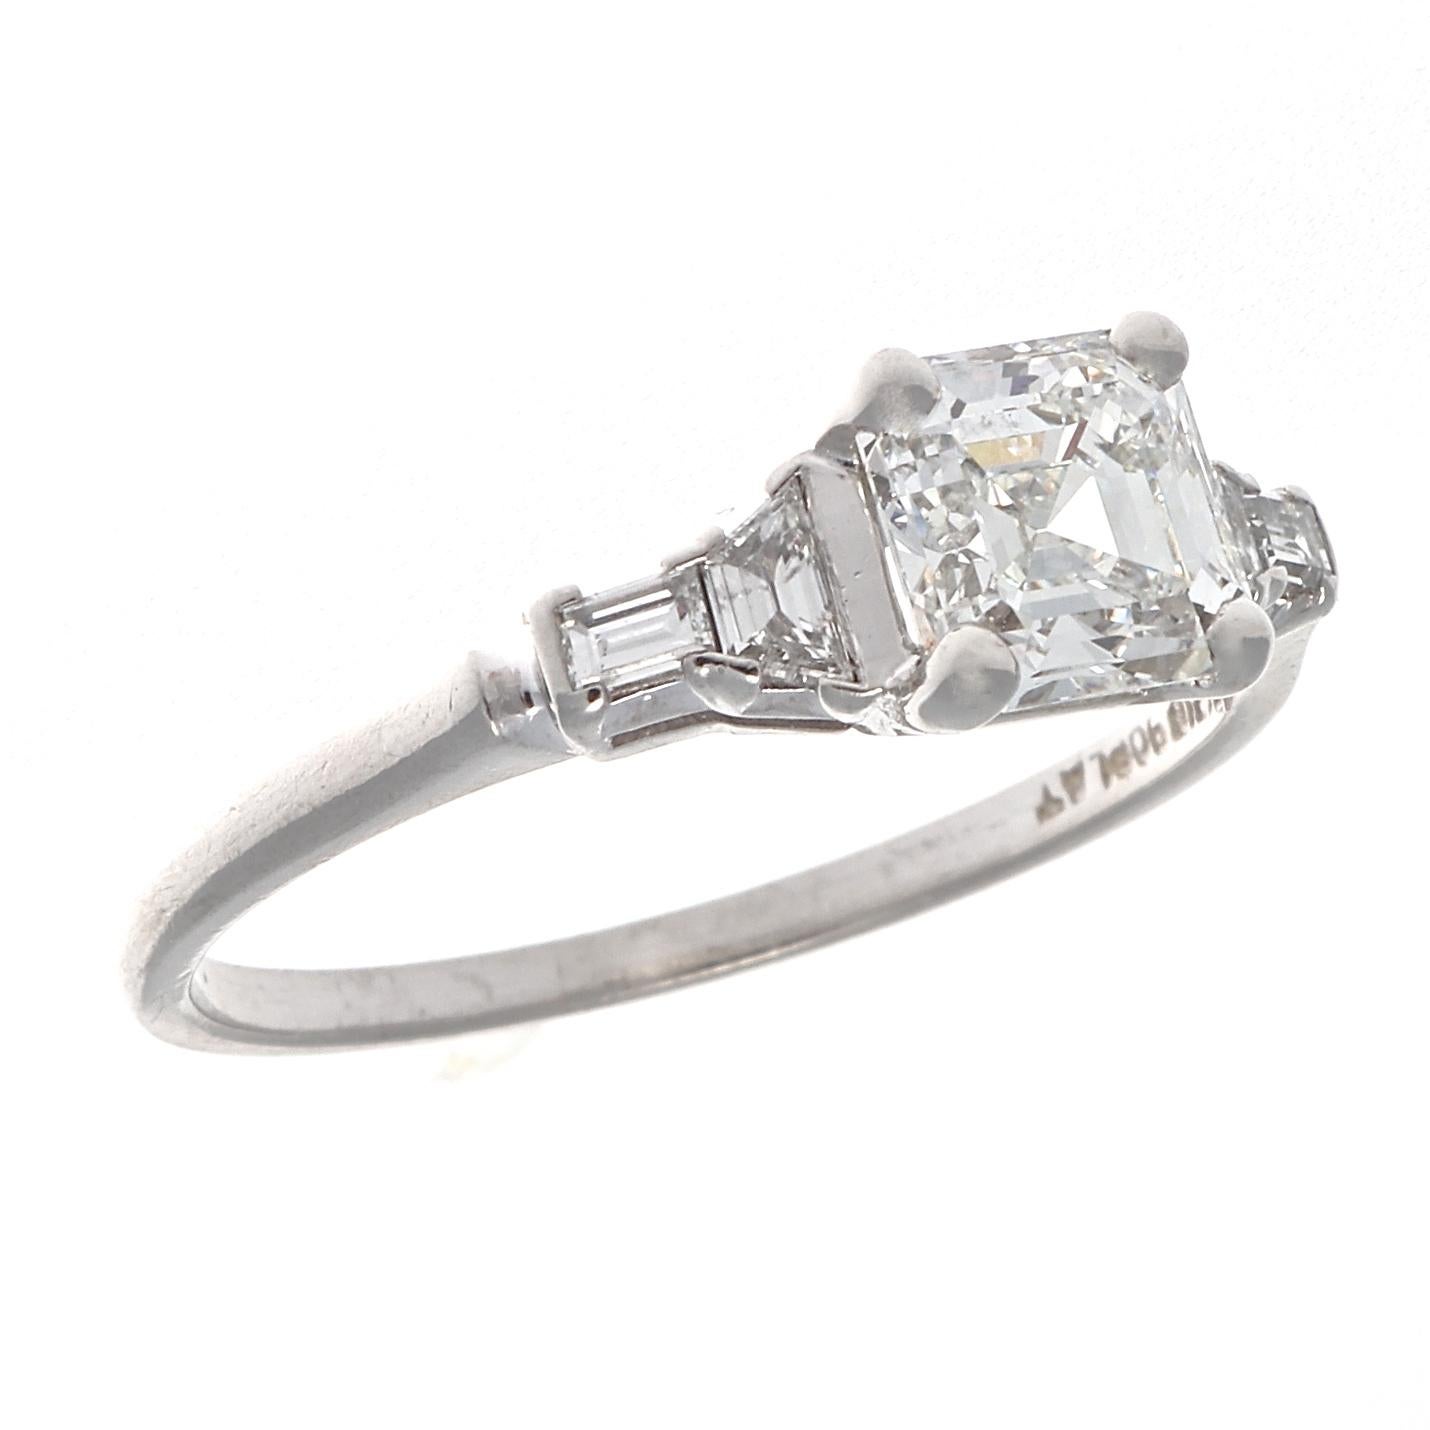 An eternal symbol of longevity with your partner in life. Featuring a 1.03 carat Asscher cut diamond that is GIA certified as G color, SI1 clarity. Accented by trapezoid cut  and baguette cut diamonds on either side. Crafted in platinum. Ring size